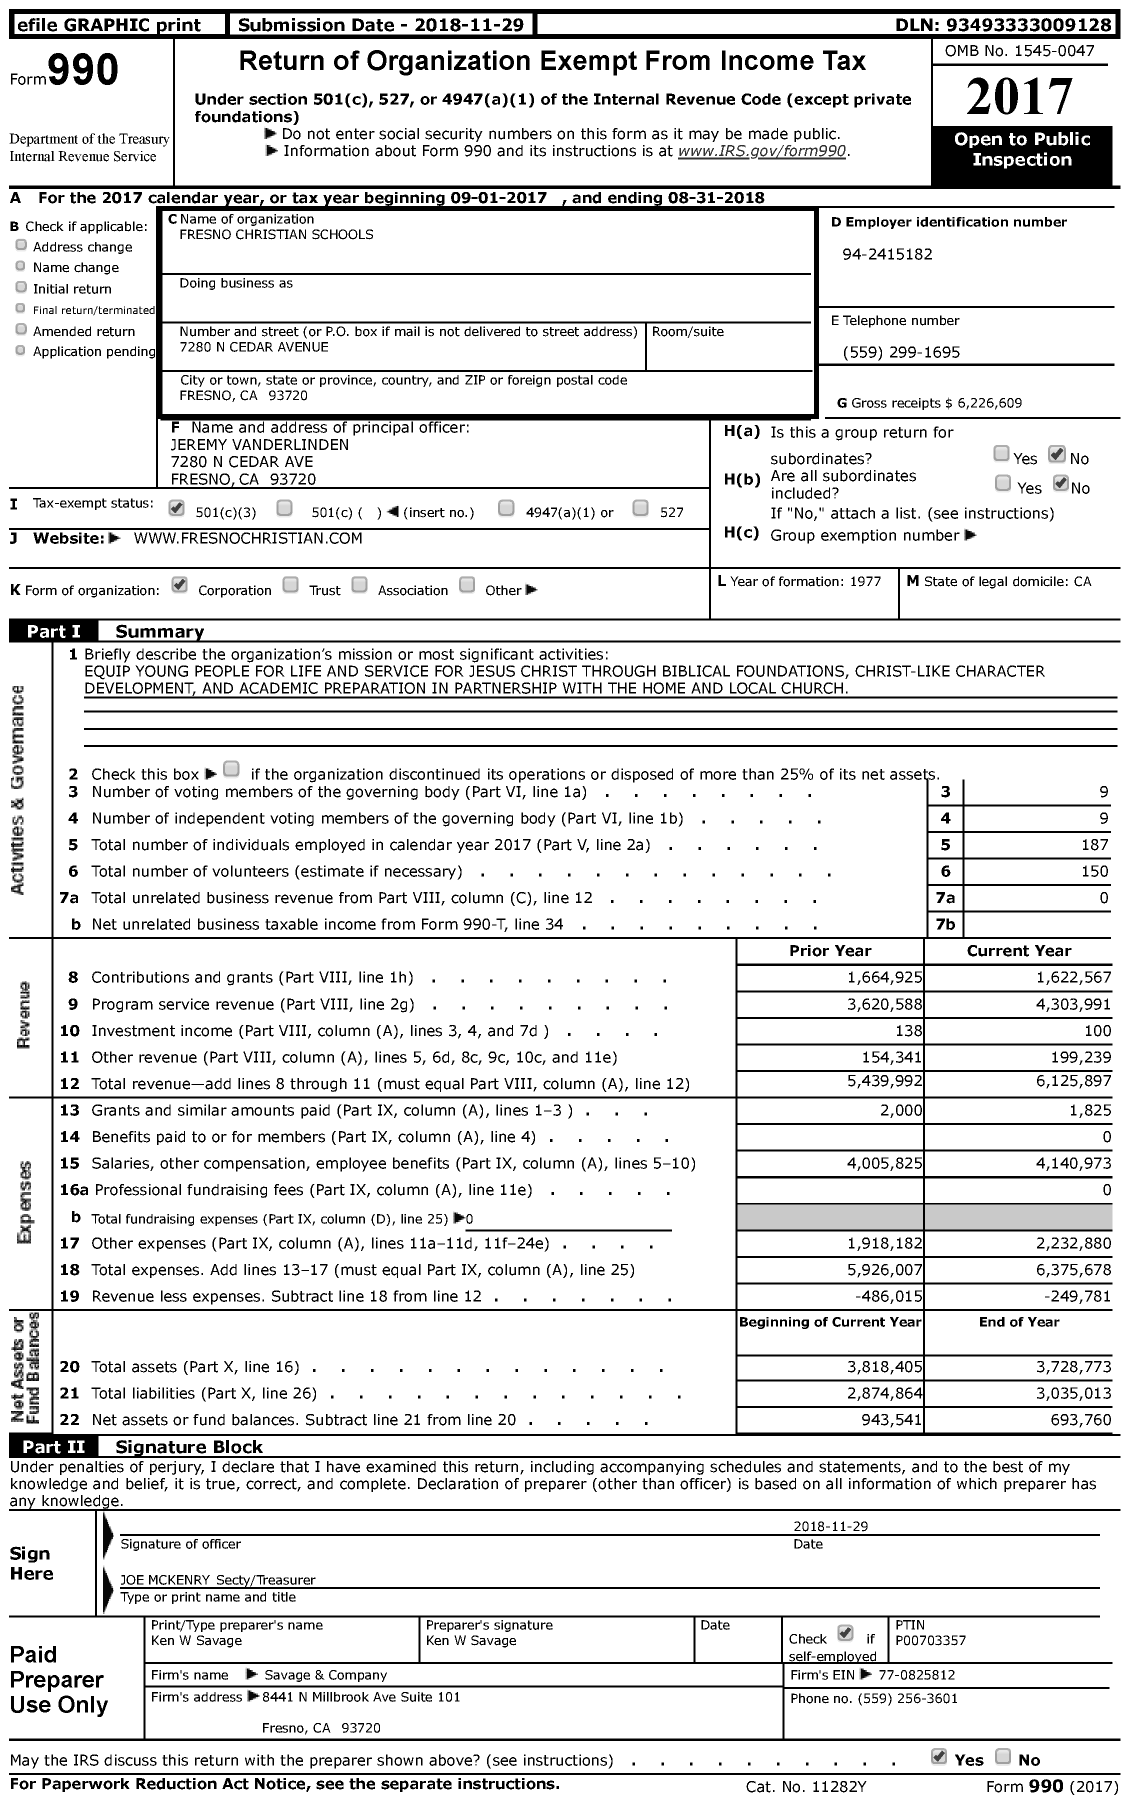 Image of first page of 2017 Form 990 for Fresno Christian Schools (FCS)